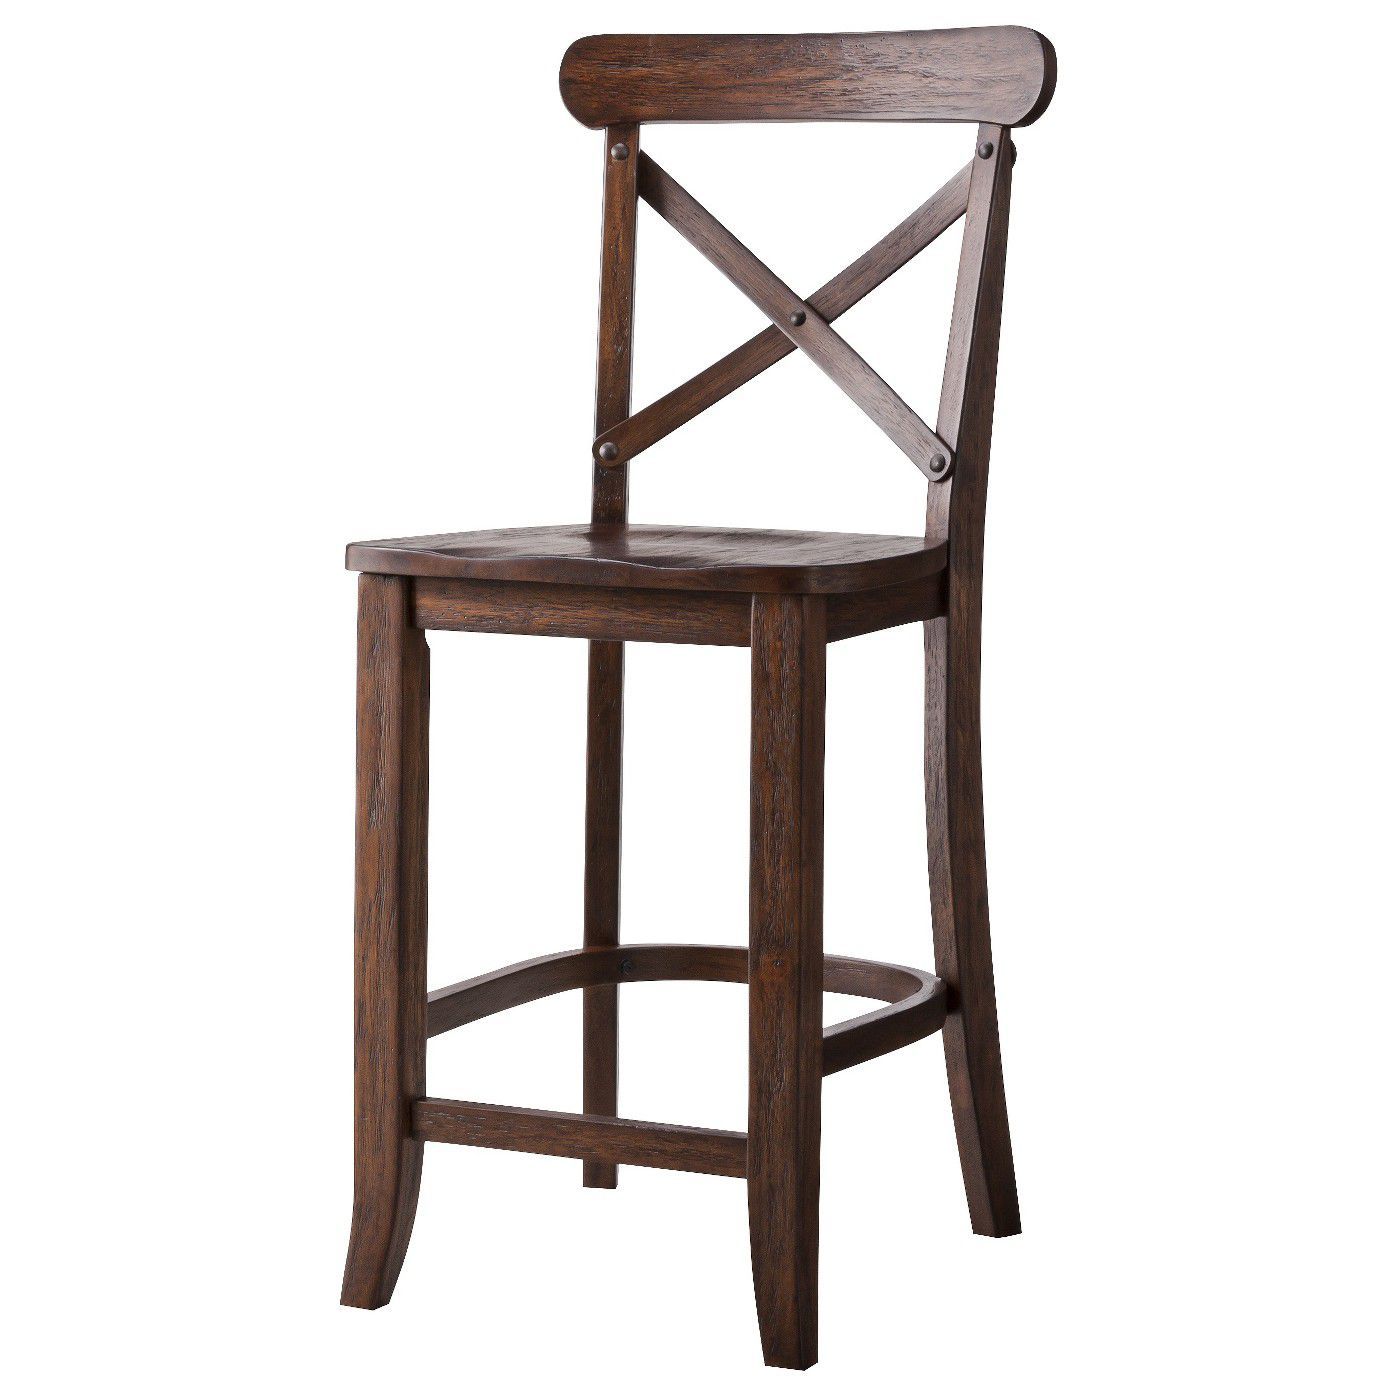 Farmhouse Bar Stools For Your Kitchen, Rustic Farmhouse Bar Stools